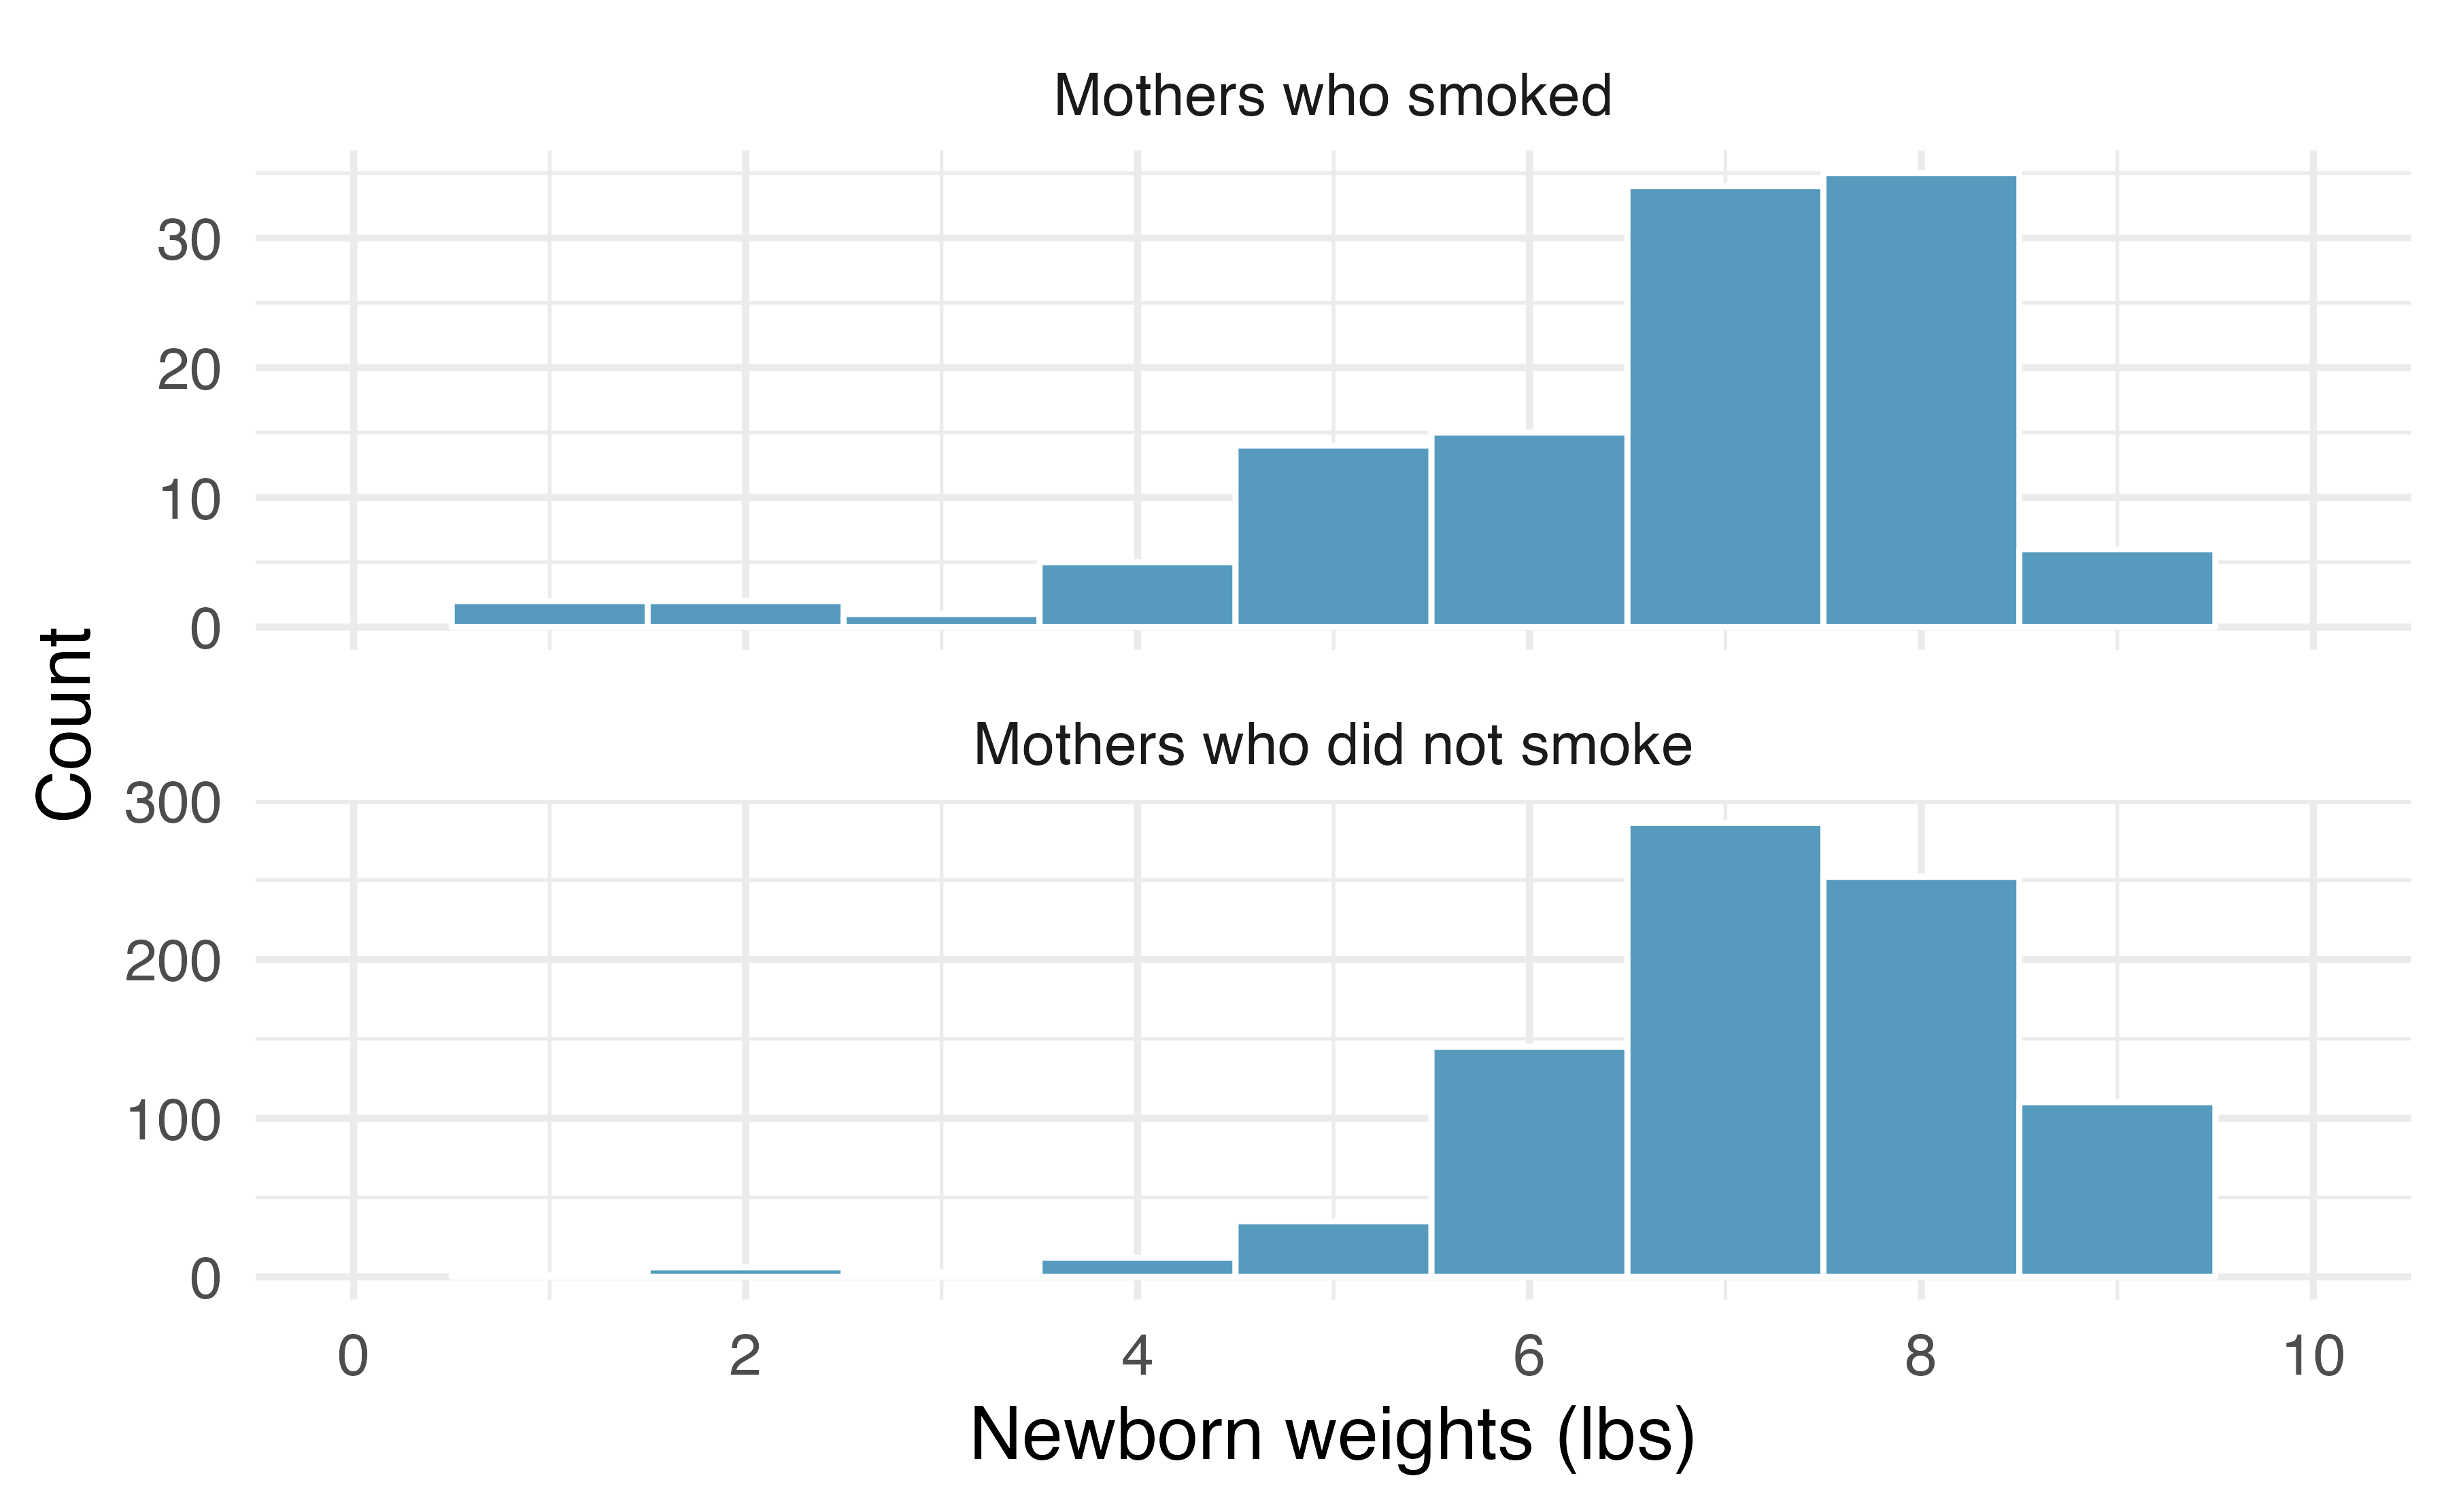 The top panel represents birth weights for infants whose mothers smoked during pregnancy. The bottom panel represents the birth weights for infants whose mothers who did not smoke during pregnancy.